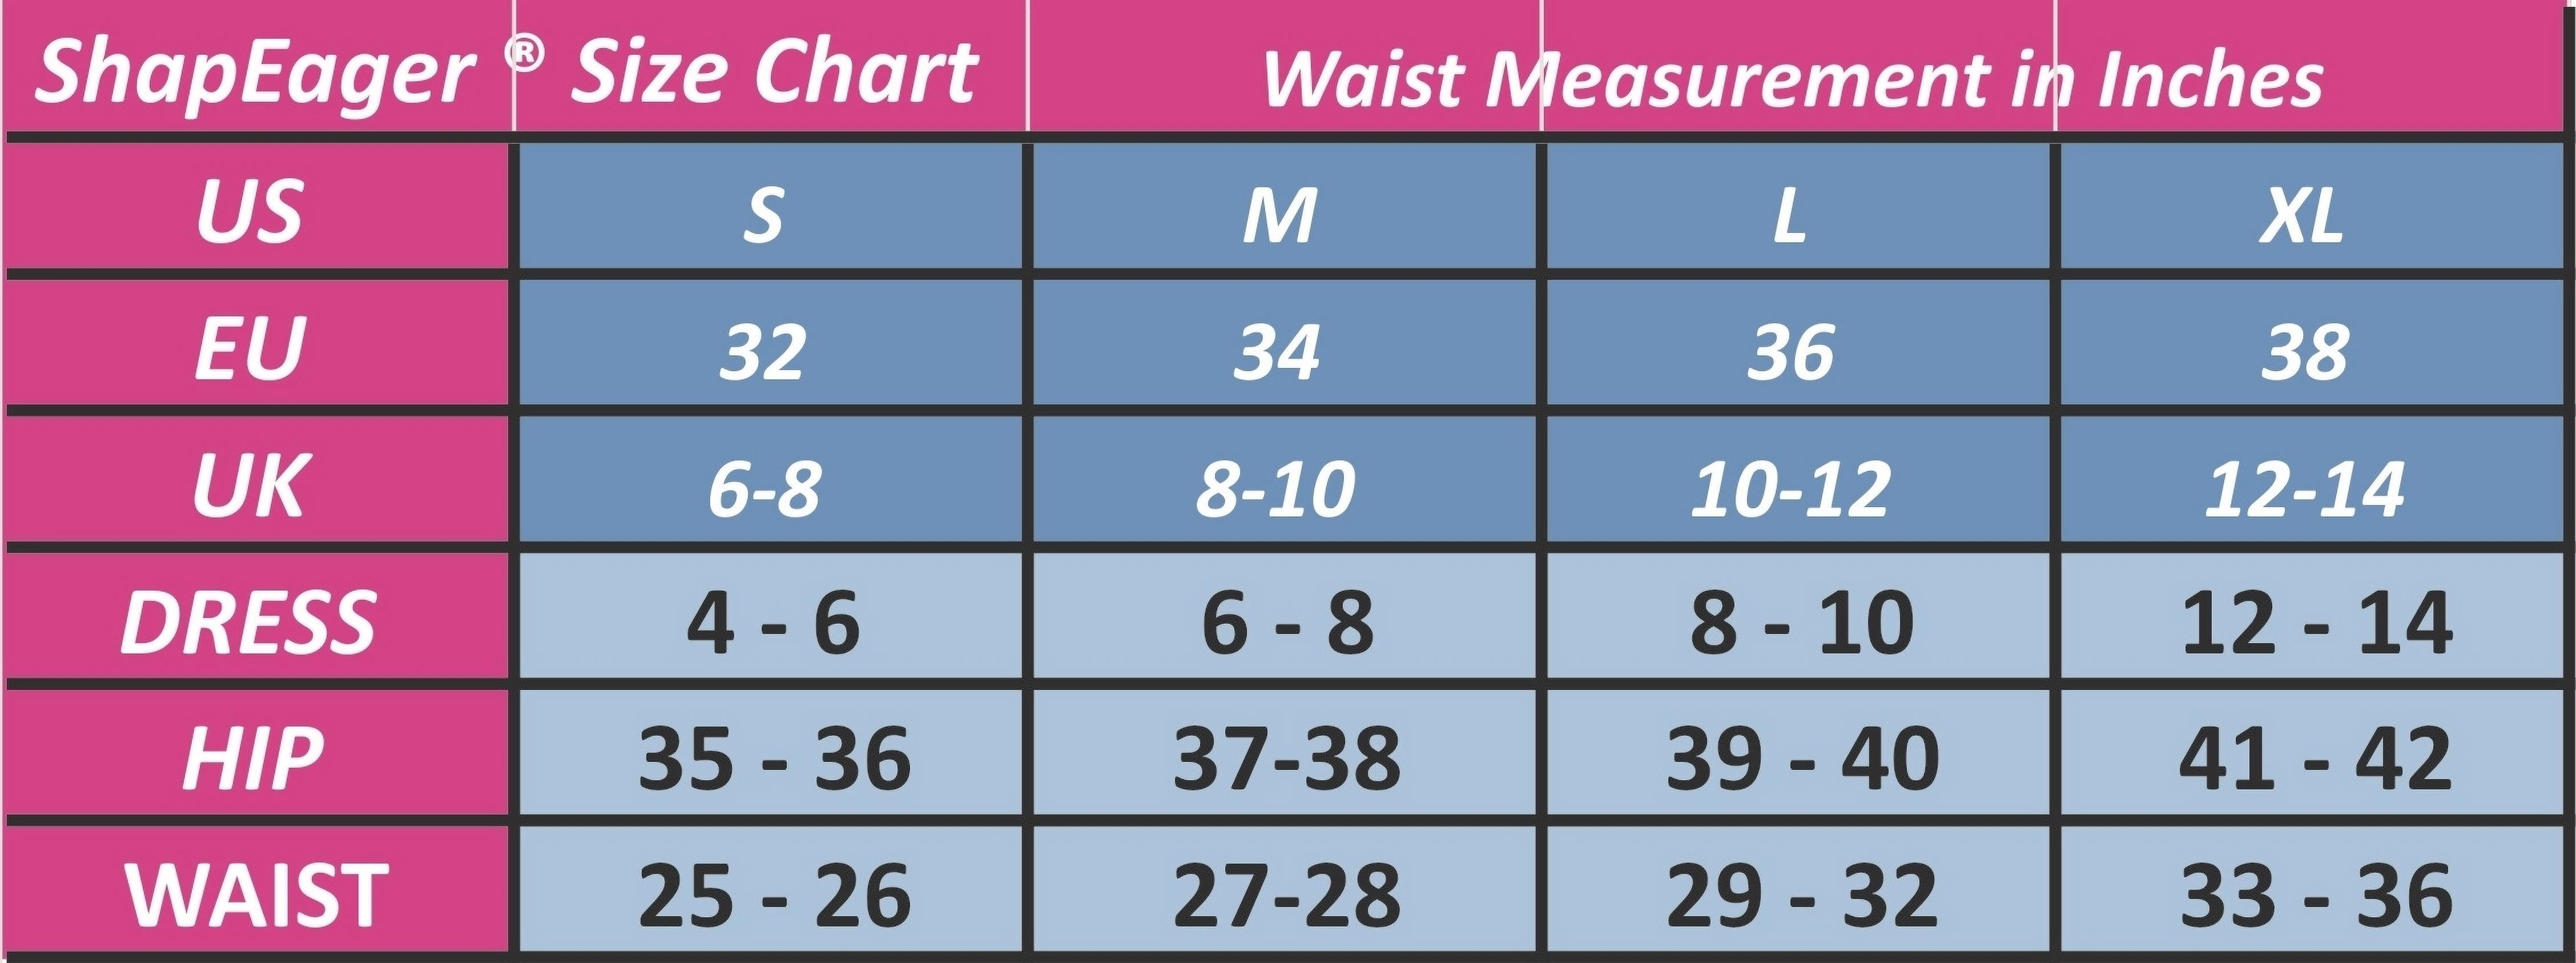 Shapewear & Fajas The Best Faja Fresh and Light Body Shaper Interior  Leggings Firm thigh compression Shapes from underbust to knees Braless  Bodysuit with good coverage Seamless Gusset opening Fajas C 